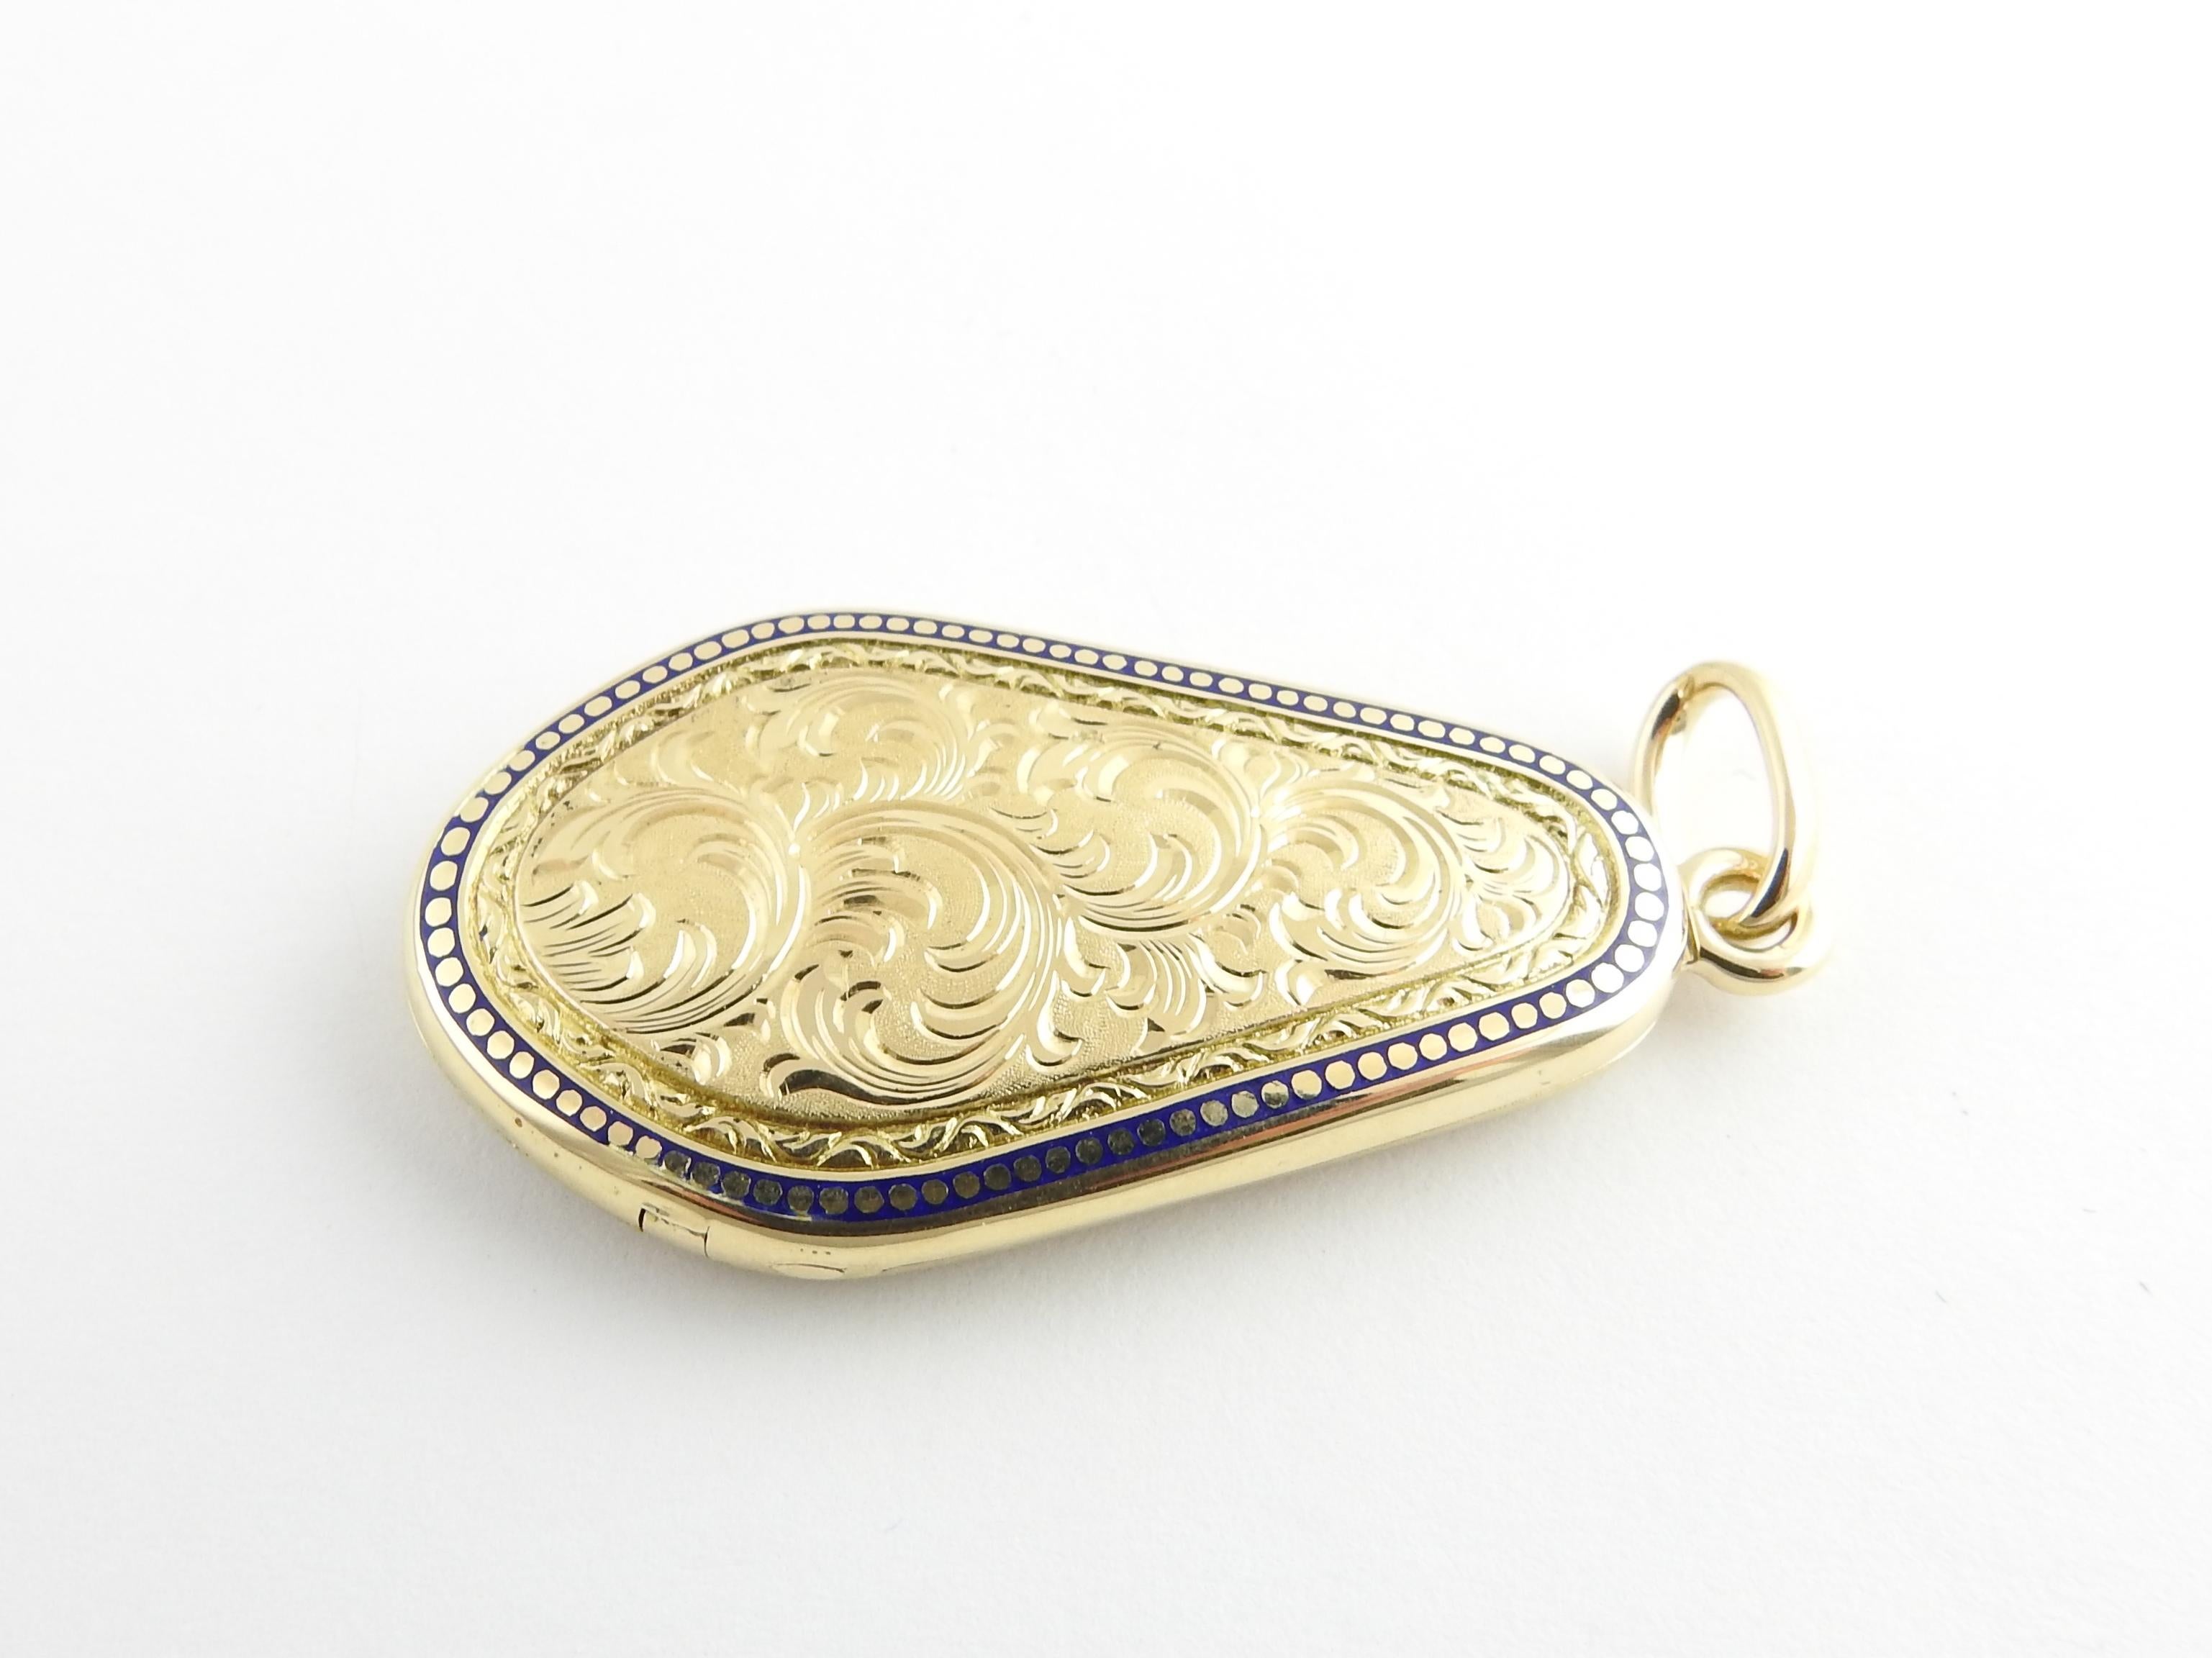 Vintage 14 Karat Yellow Gold Locket Pendant

This stunning hinged locket is crafted in beautifully detailed 14K yellow gold and accented with blue enamel.

Size: 28 mm x 6 mm

Weight: 7.7 dwt. / 12.1 gr.

Stamped: 14K PORTUGAL

Very good condition,